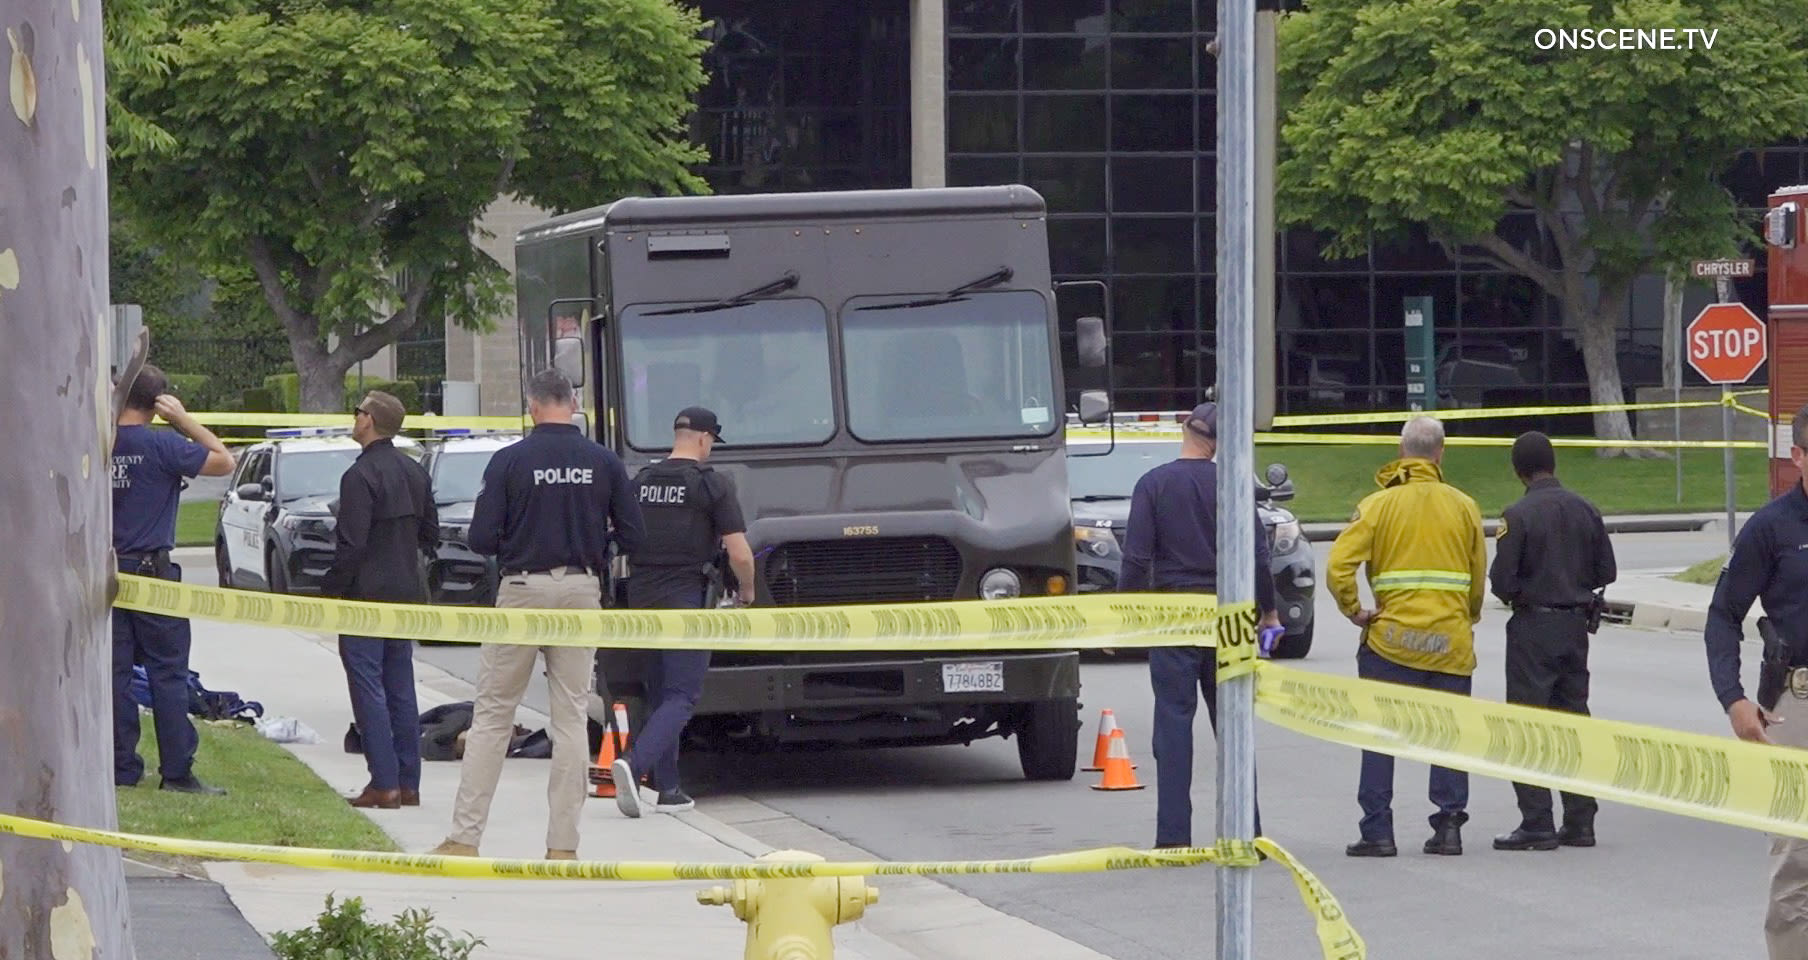 UPS driver killed in Irvine ID'd; suspect worked for same company, police say